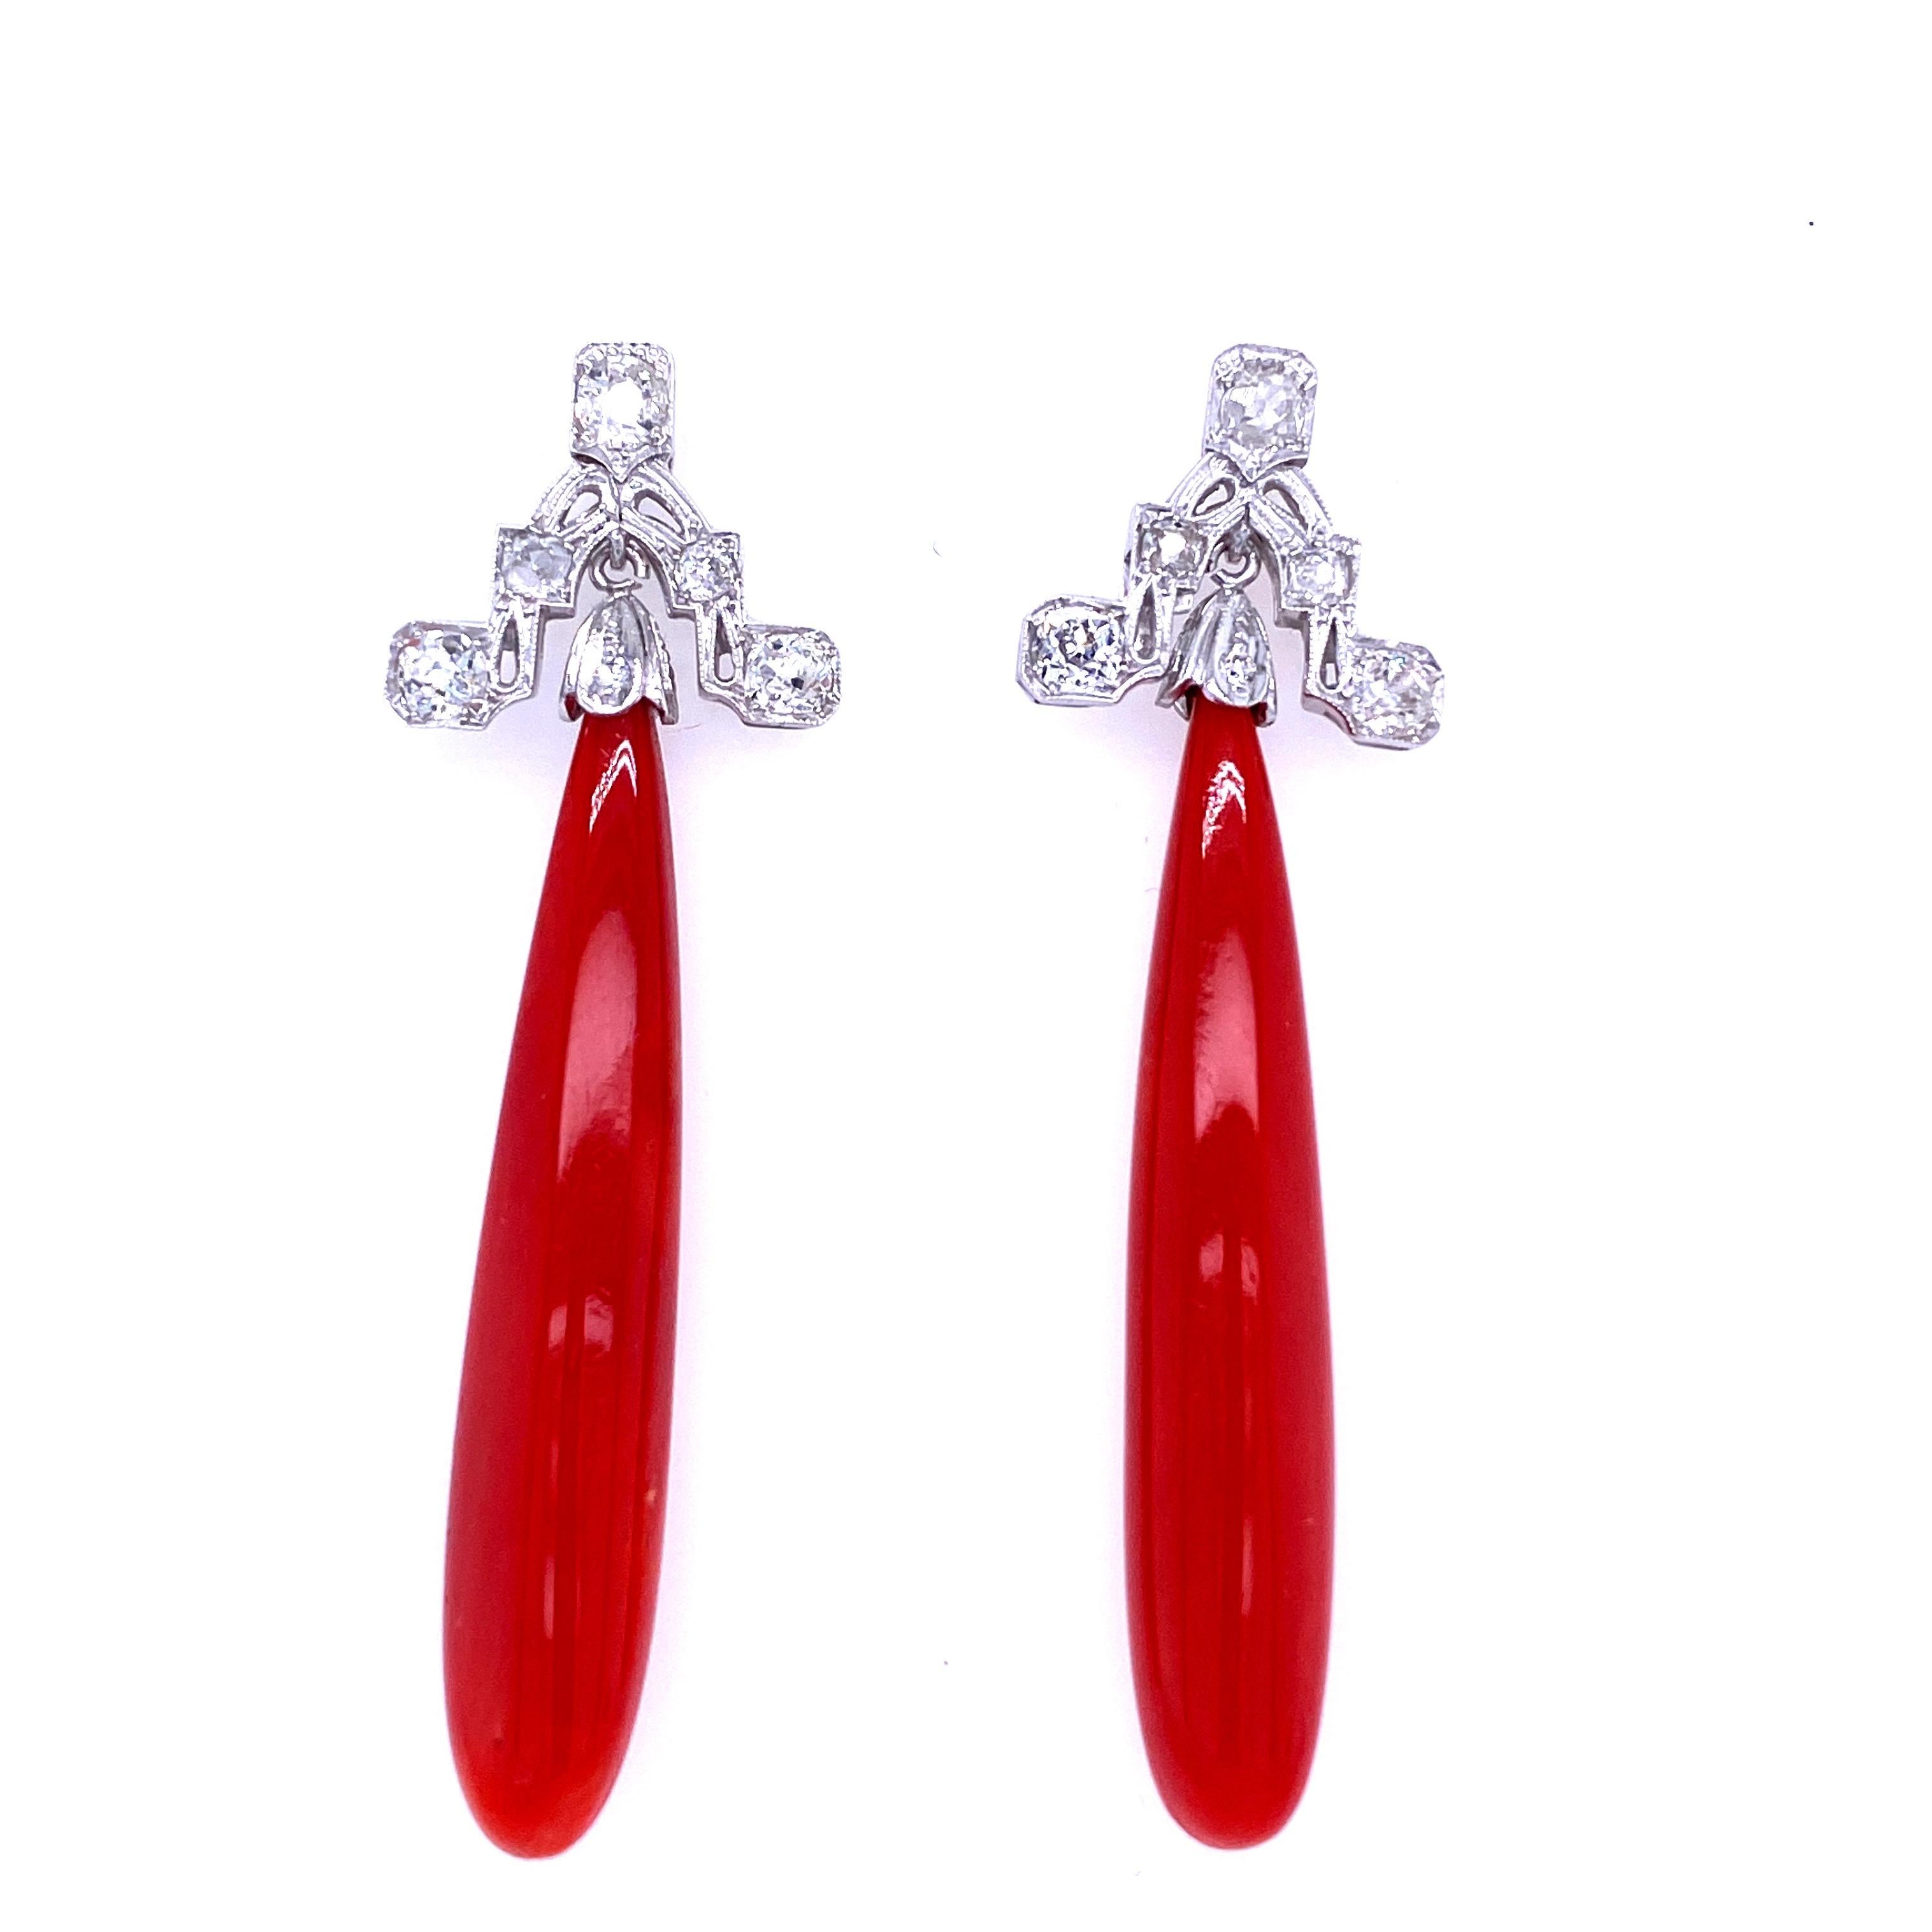 Elegant Mediterranean Coral, Diamond gold earrings. The two pear shaped corals are of the highest quality, free of imperfections, vibrant and beautiful red color.
They are set in 18k gold and old mine diamonds, total weight 1.30 carat G/H color Vvs